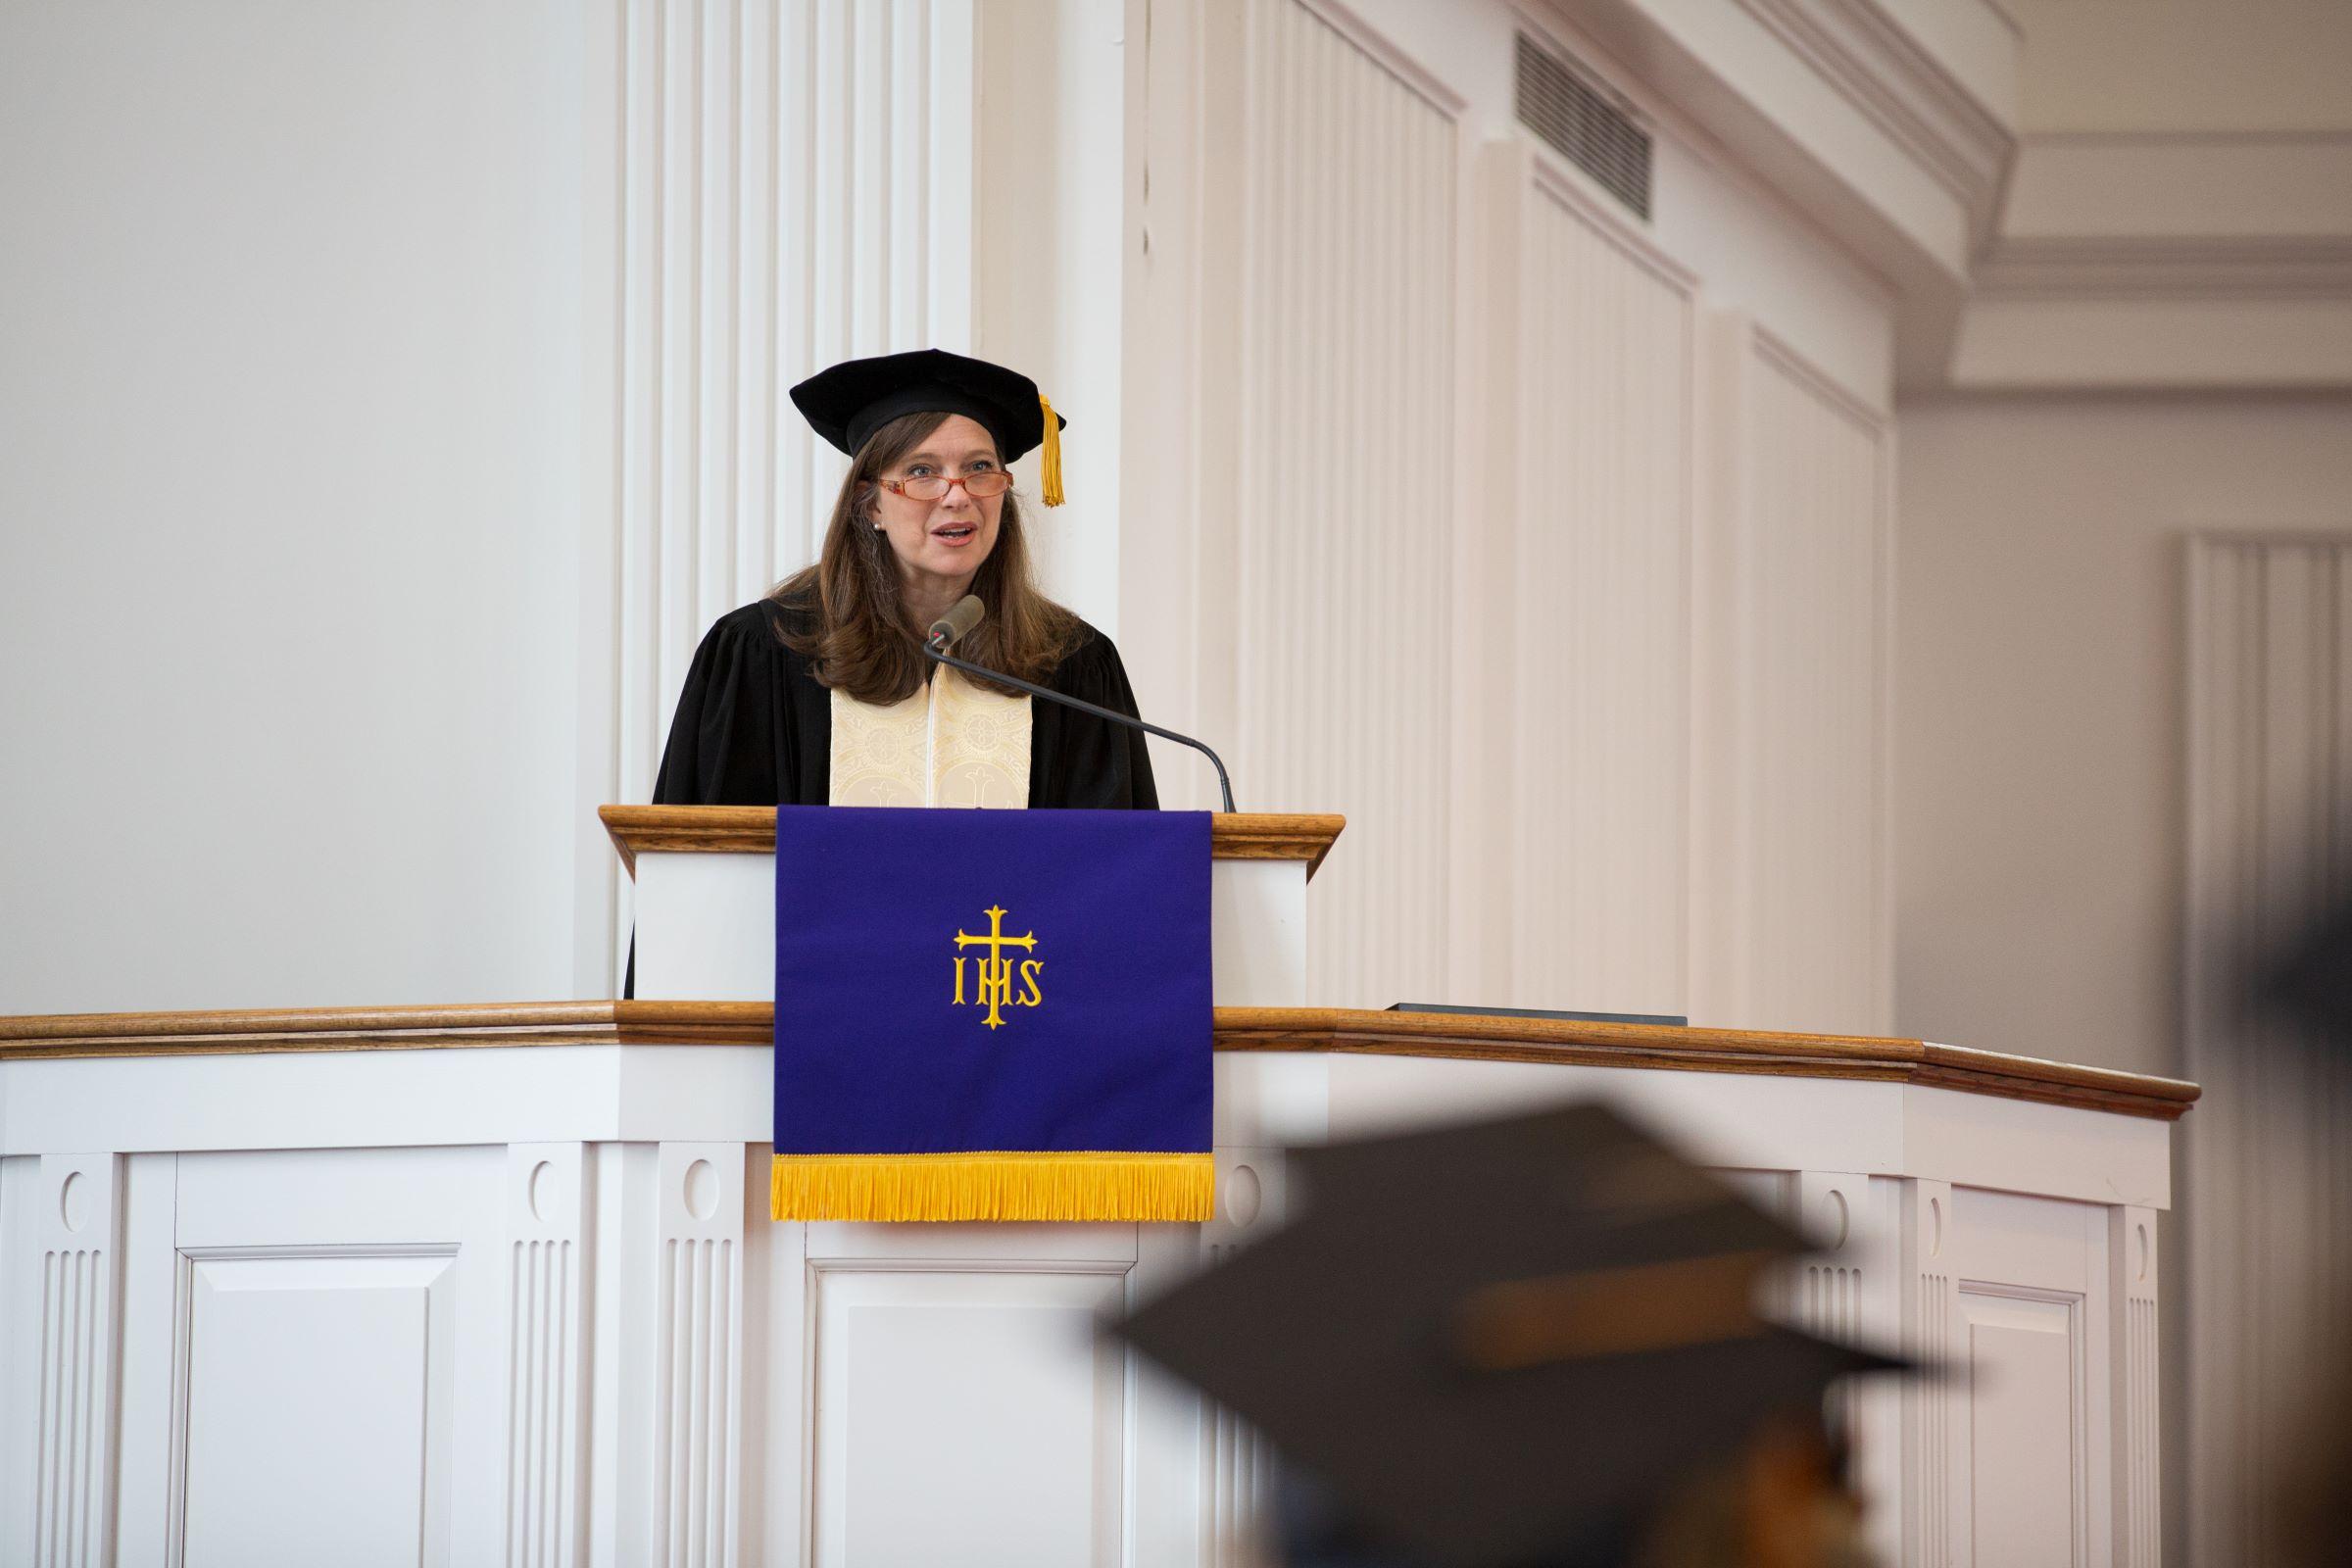 Rev. Shelley addresses students at Baccalaureate service